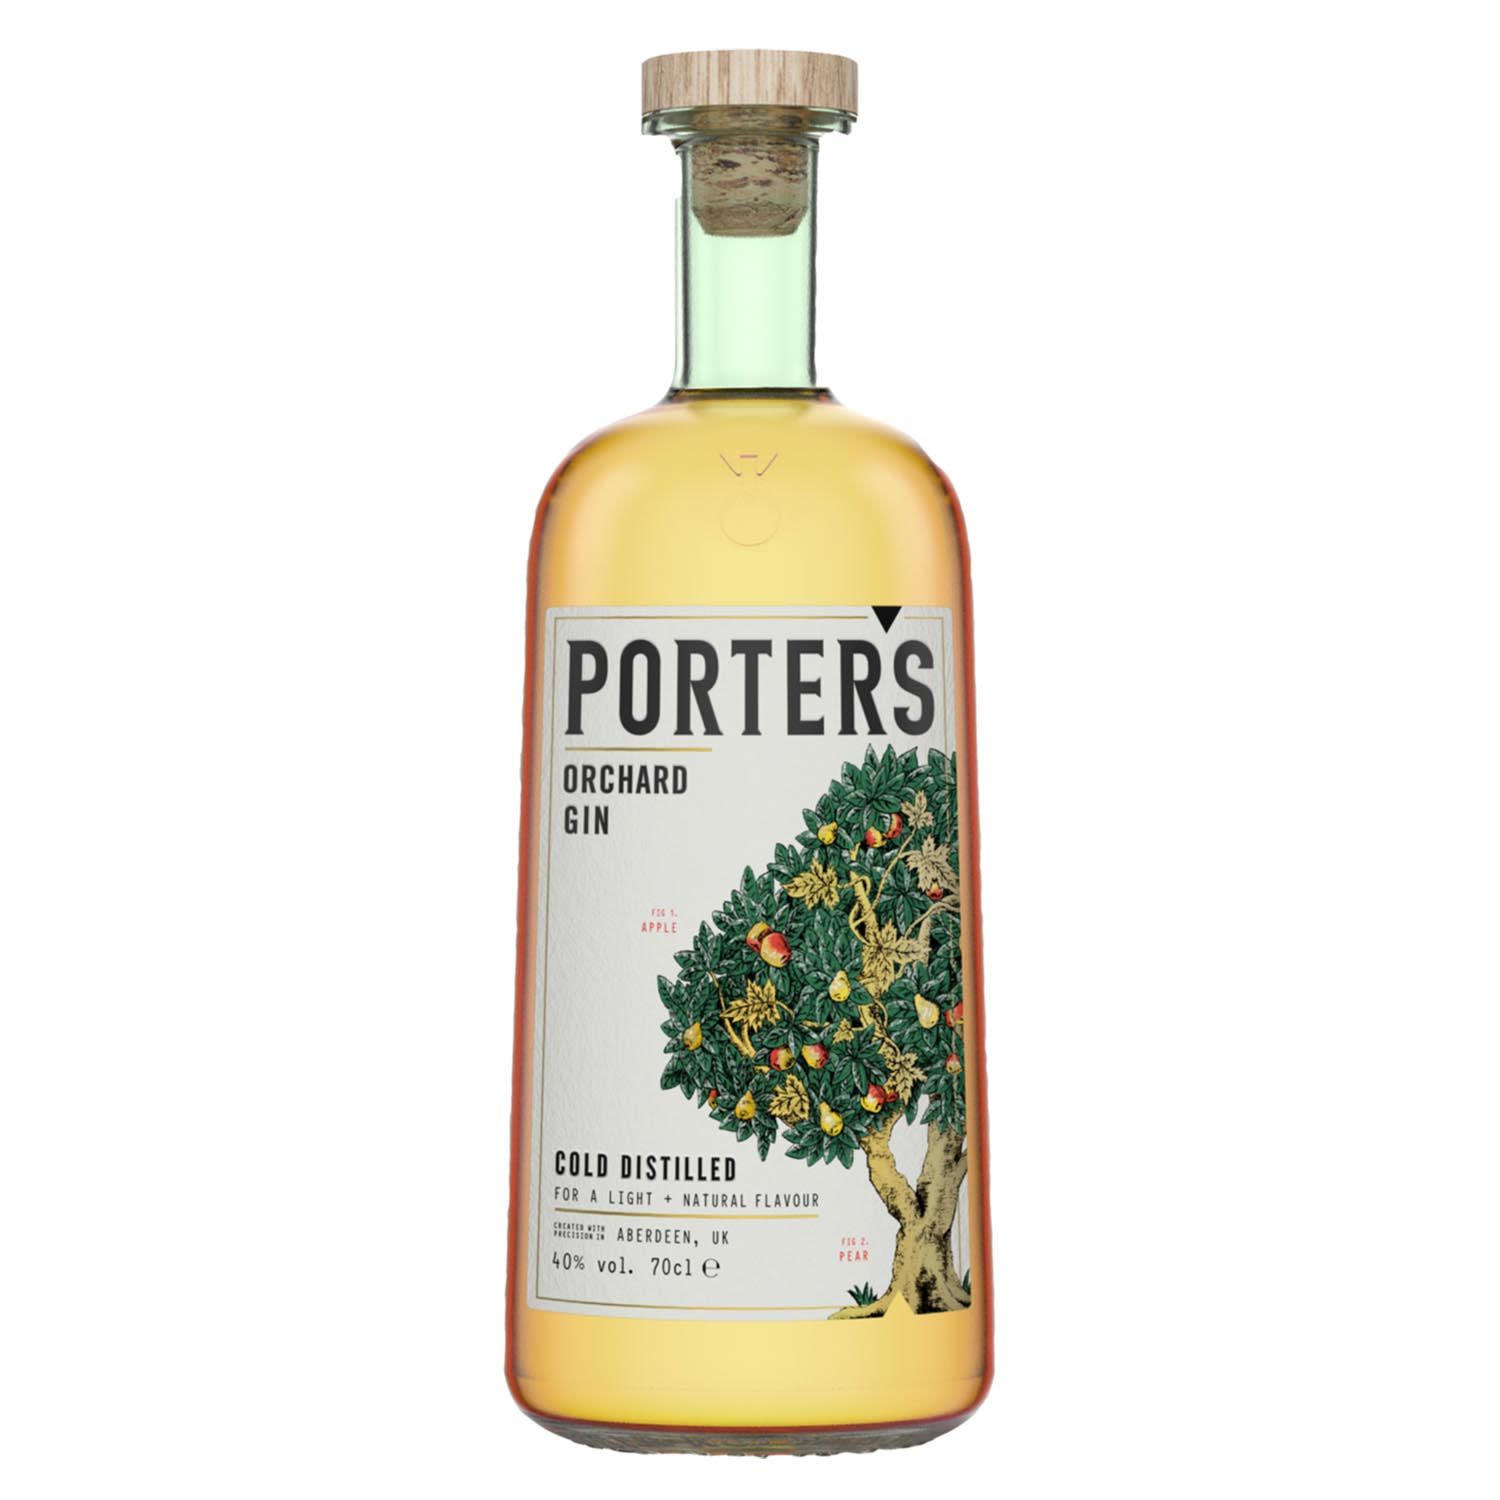 Porters Orchard Gin 40.0% 700mL Bottle